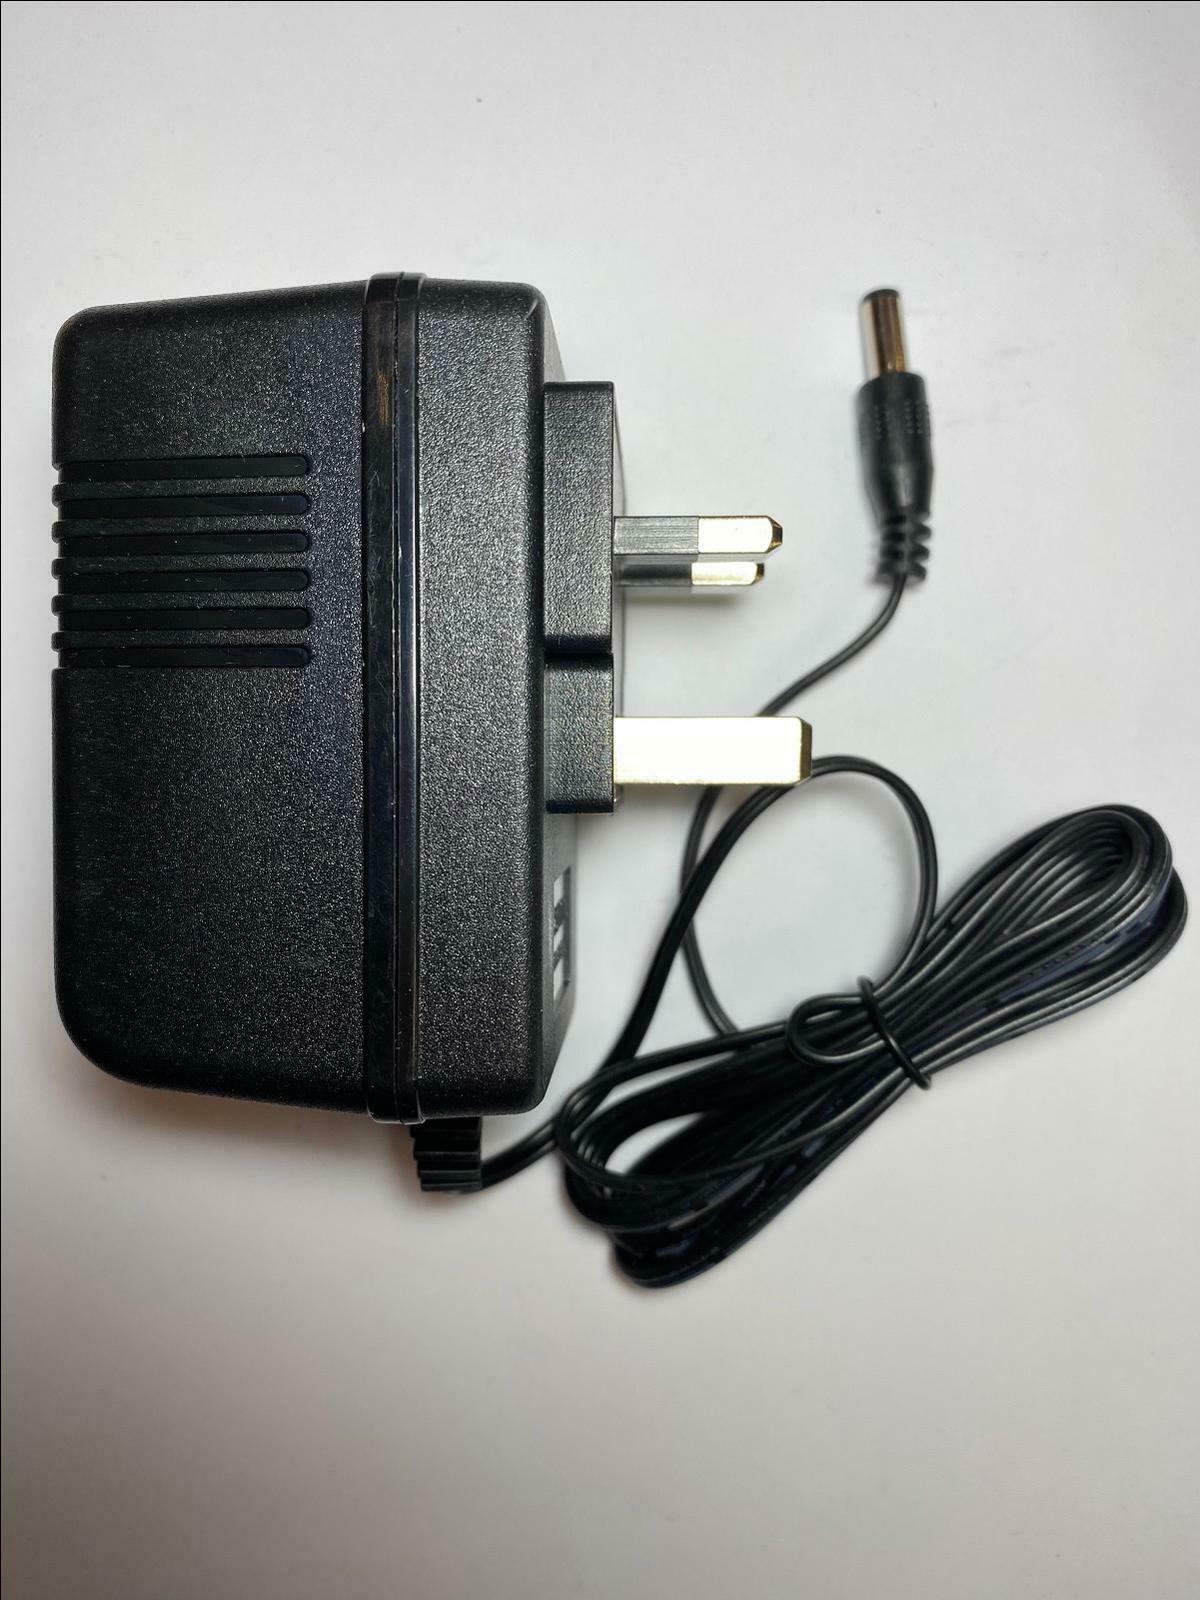 Output: 12VDC 1000mA AC/DC Adaptor Power Supply Model: LK-D120100 for Childs Car MPN: WJB-Y481201000D EAN: Does not